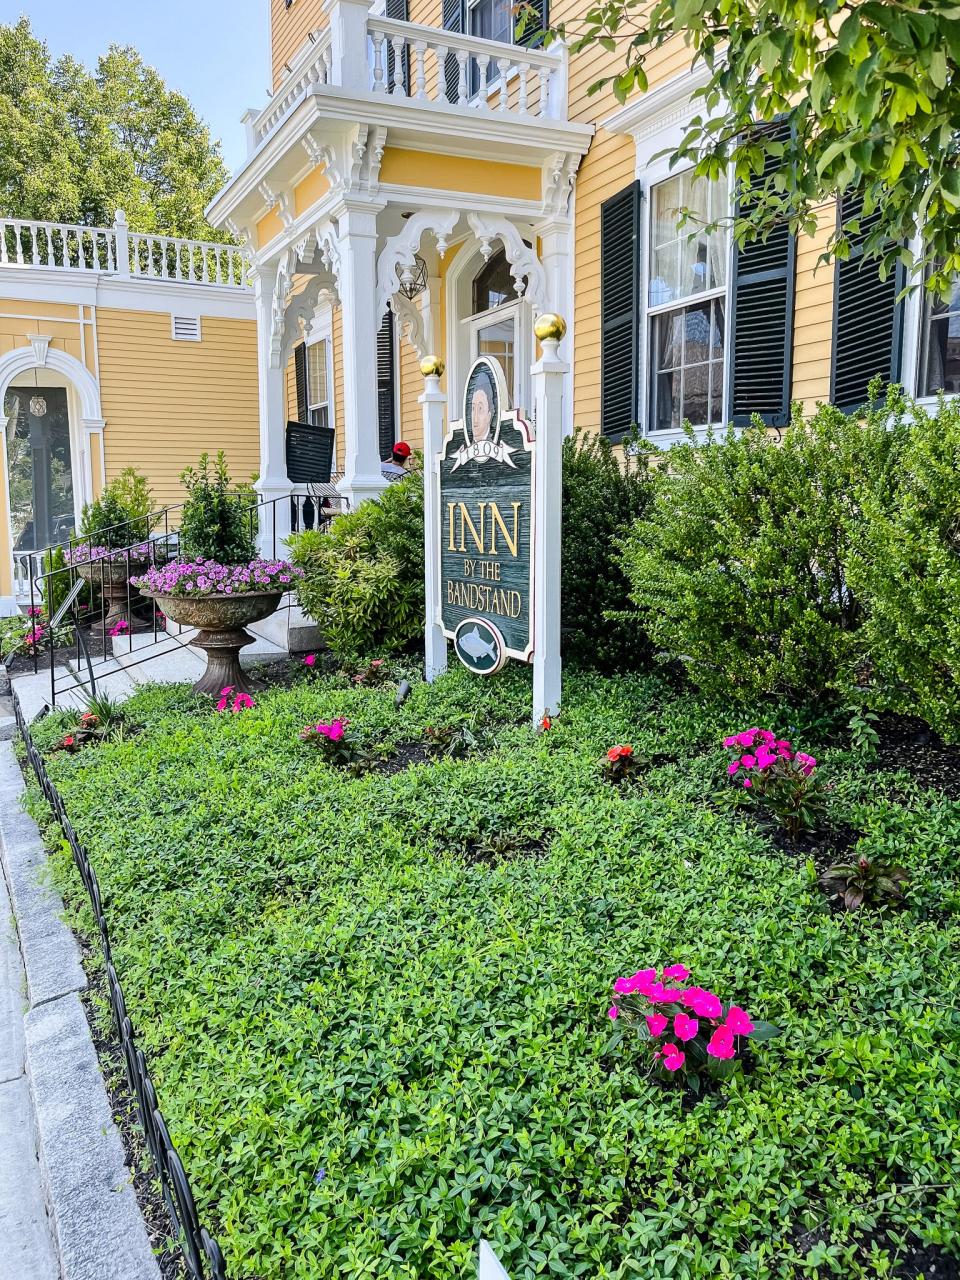 The Civic Beautification Award for 2023 went to Robin Davis (partner of Jamie Lopez, owner of Inn at the Bandstand, Exeter). The front garden and planters at the Inn bring beauty to the historic downtown of Exeter.